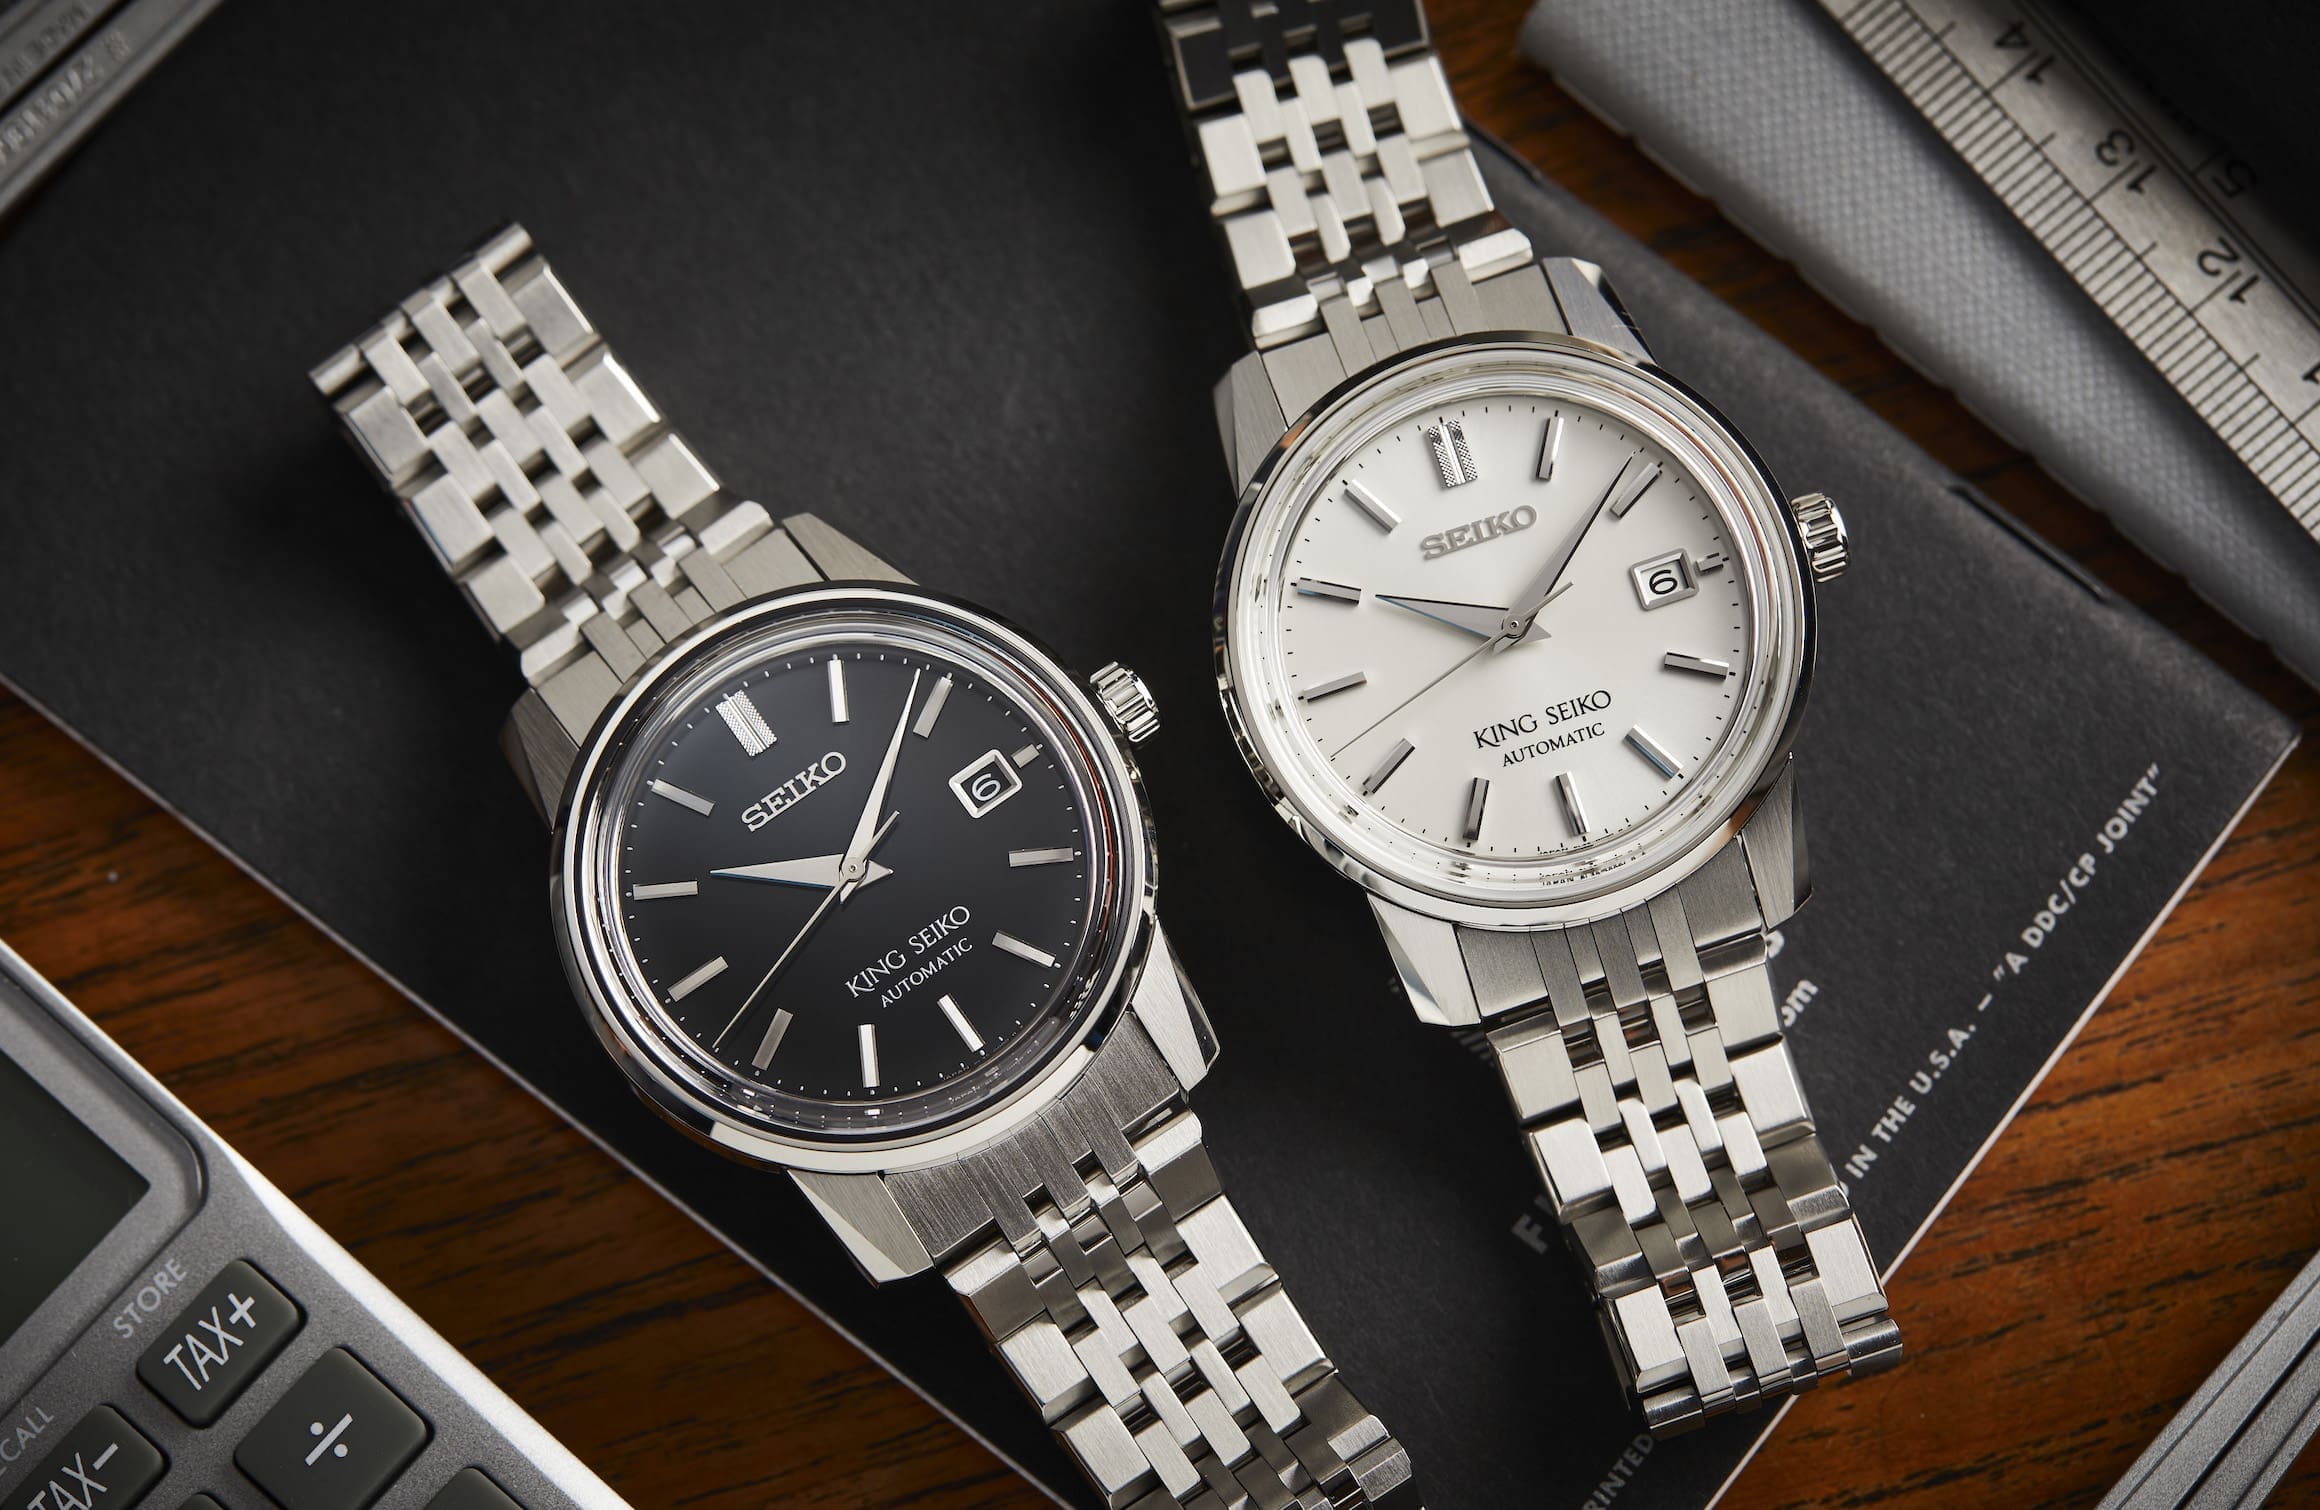 The slender new King Seiko collection channels the retro elegance of the 1965 original